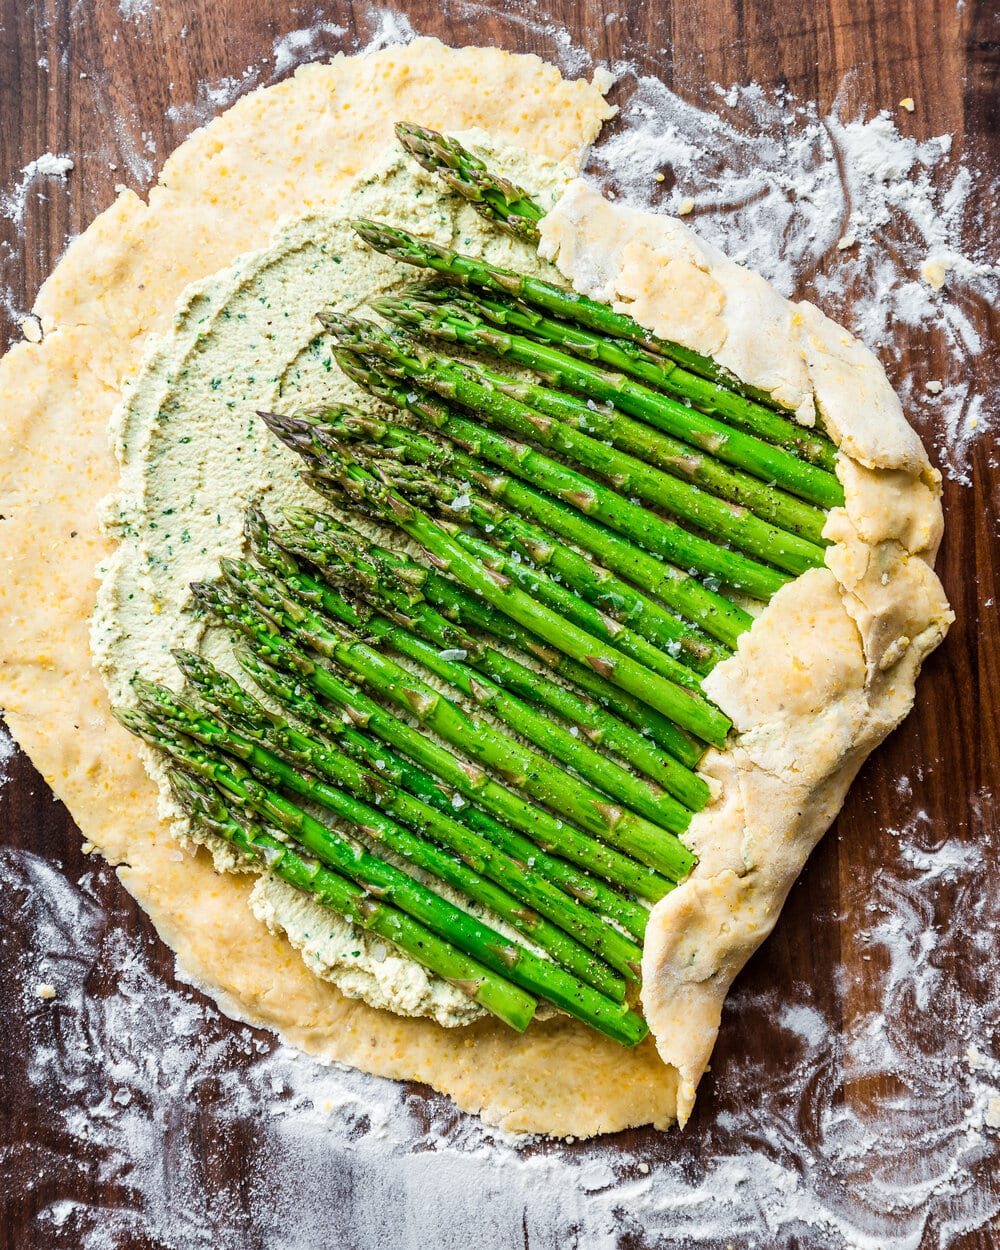 Dough underneath and folded over two sides of the asparagus and tofu ricotta on a wooden cutting board.